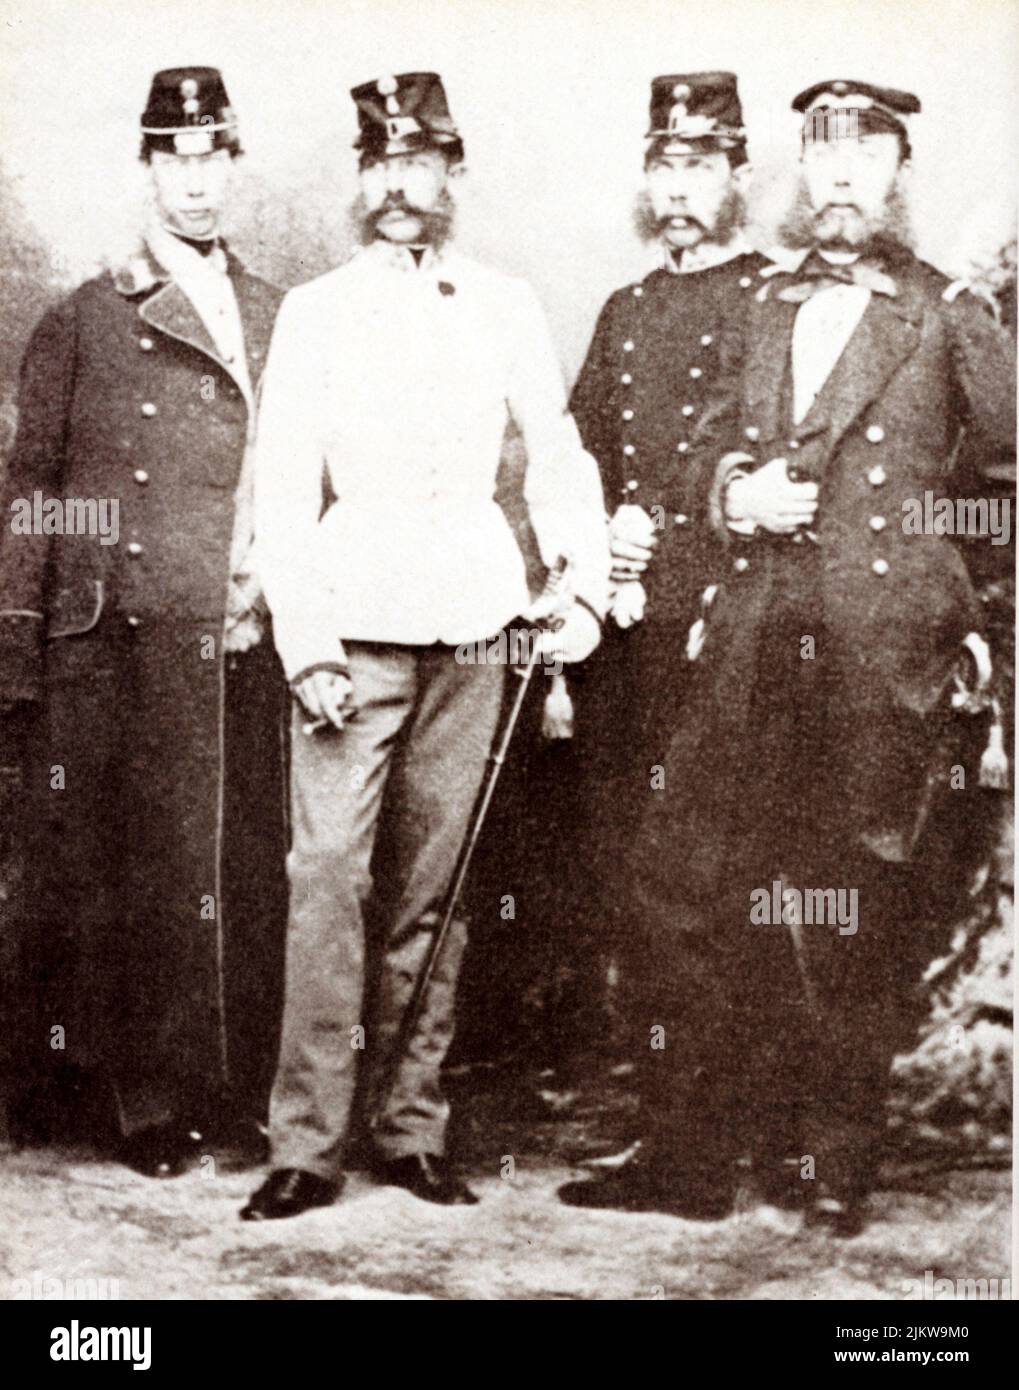 1862 , Wien , Austria   : The four HABSBURG brothers : in  center the  celebrated austrian   Kaiser FRANZ JOSEF  ( 1830 - 1916 ) , Emperor of Austria , King of Hungary and Bohemia  (from left )  :  the young LUDWIG VIKTOR ( 1842 - 1919 ) ,  KARL LUDWIG ( 1833 - 1896 , father of crownprince Franz Ferdinand killed in Sarajevo 1914 ) and Ferdinand MAXIMILIAN (future 1864  Emperor of Mexico , 1832 - 1867 )  - FRANCESCO GIUSEPPE - JOSEPH - ABSBURG - ASBURG - ASBURGO - NOBILITY - NOBILI - NOBILTA' - REALI  - ABSBURGO - HASBURG - ROYALTY  - family - famiglia - fratelli  ----  Archivio GBB Stock Photo